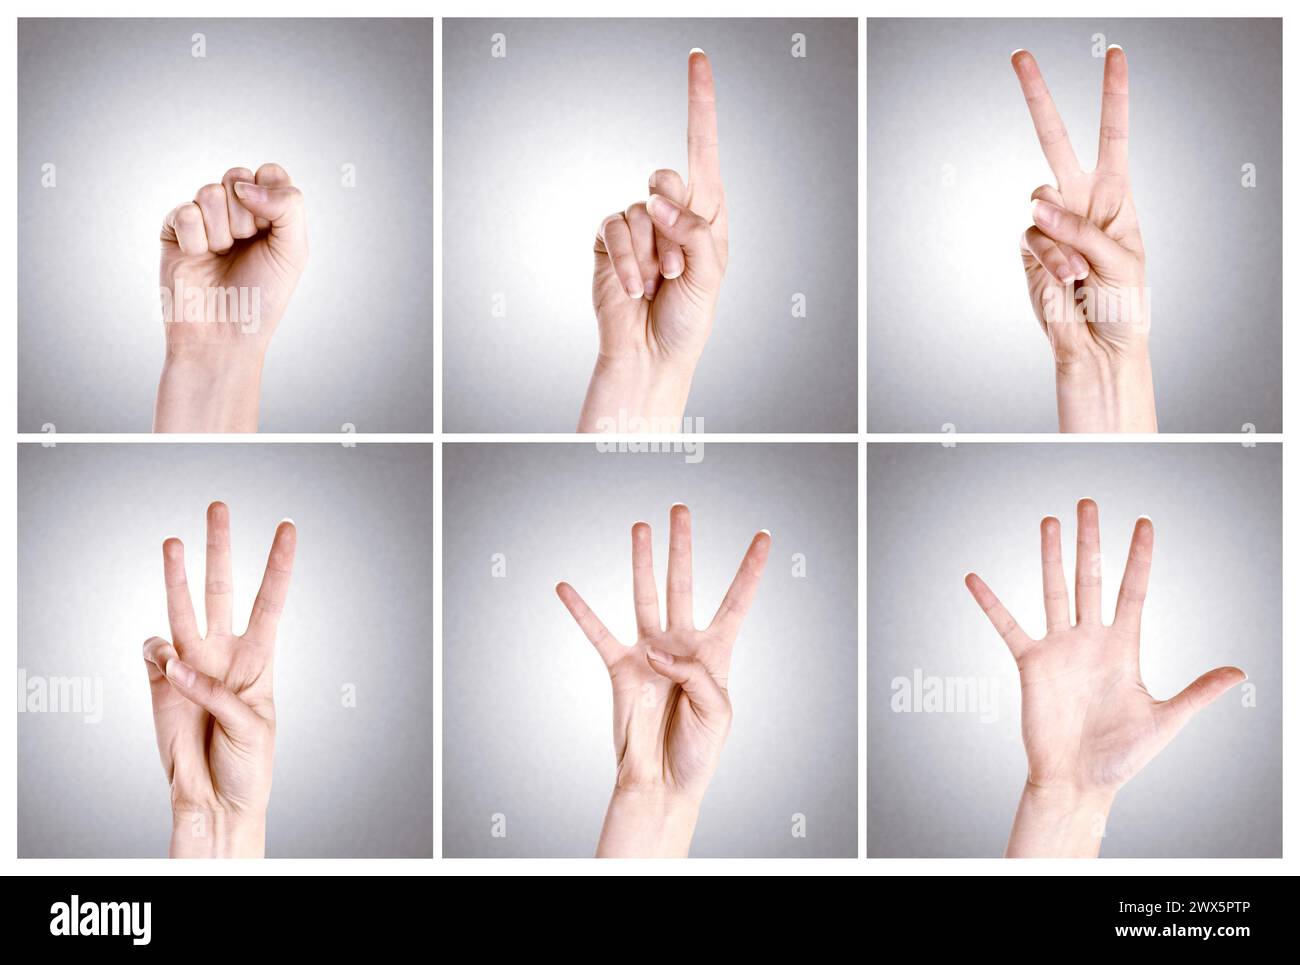 Fingers, mathematics and sign numbers in studio for counting or education purpose on gray background. Vote, review or count down shown in language for Stock Photo